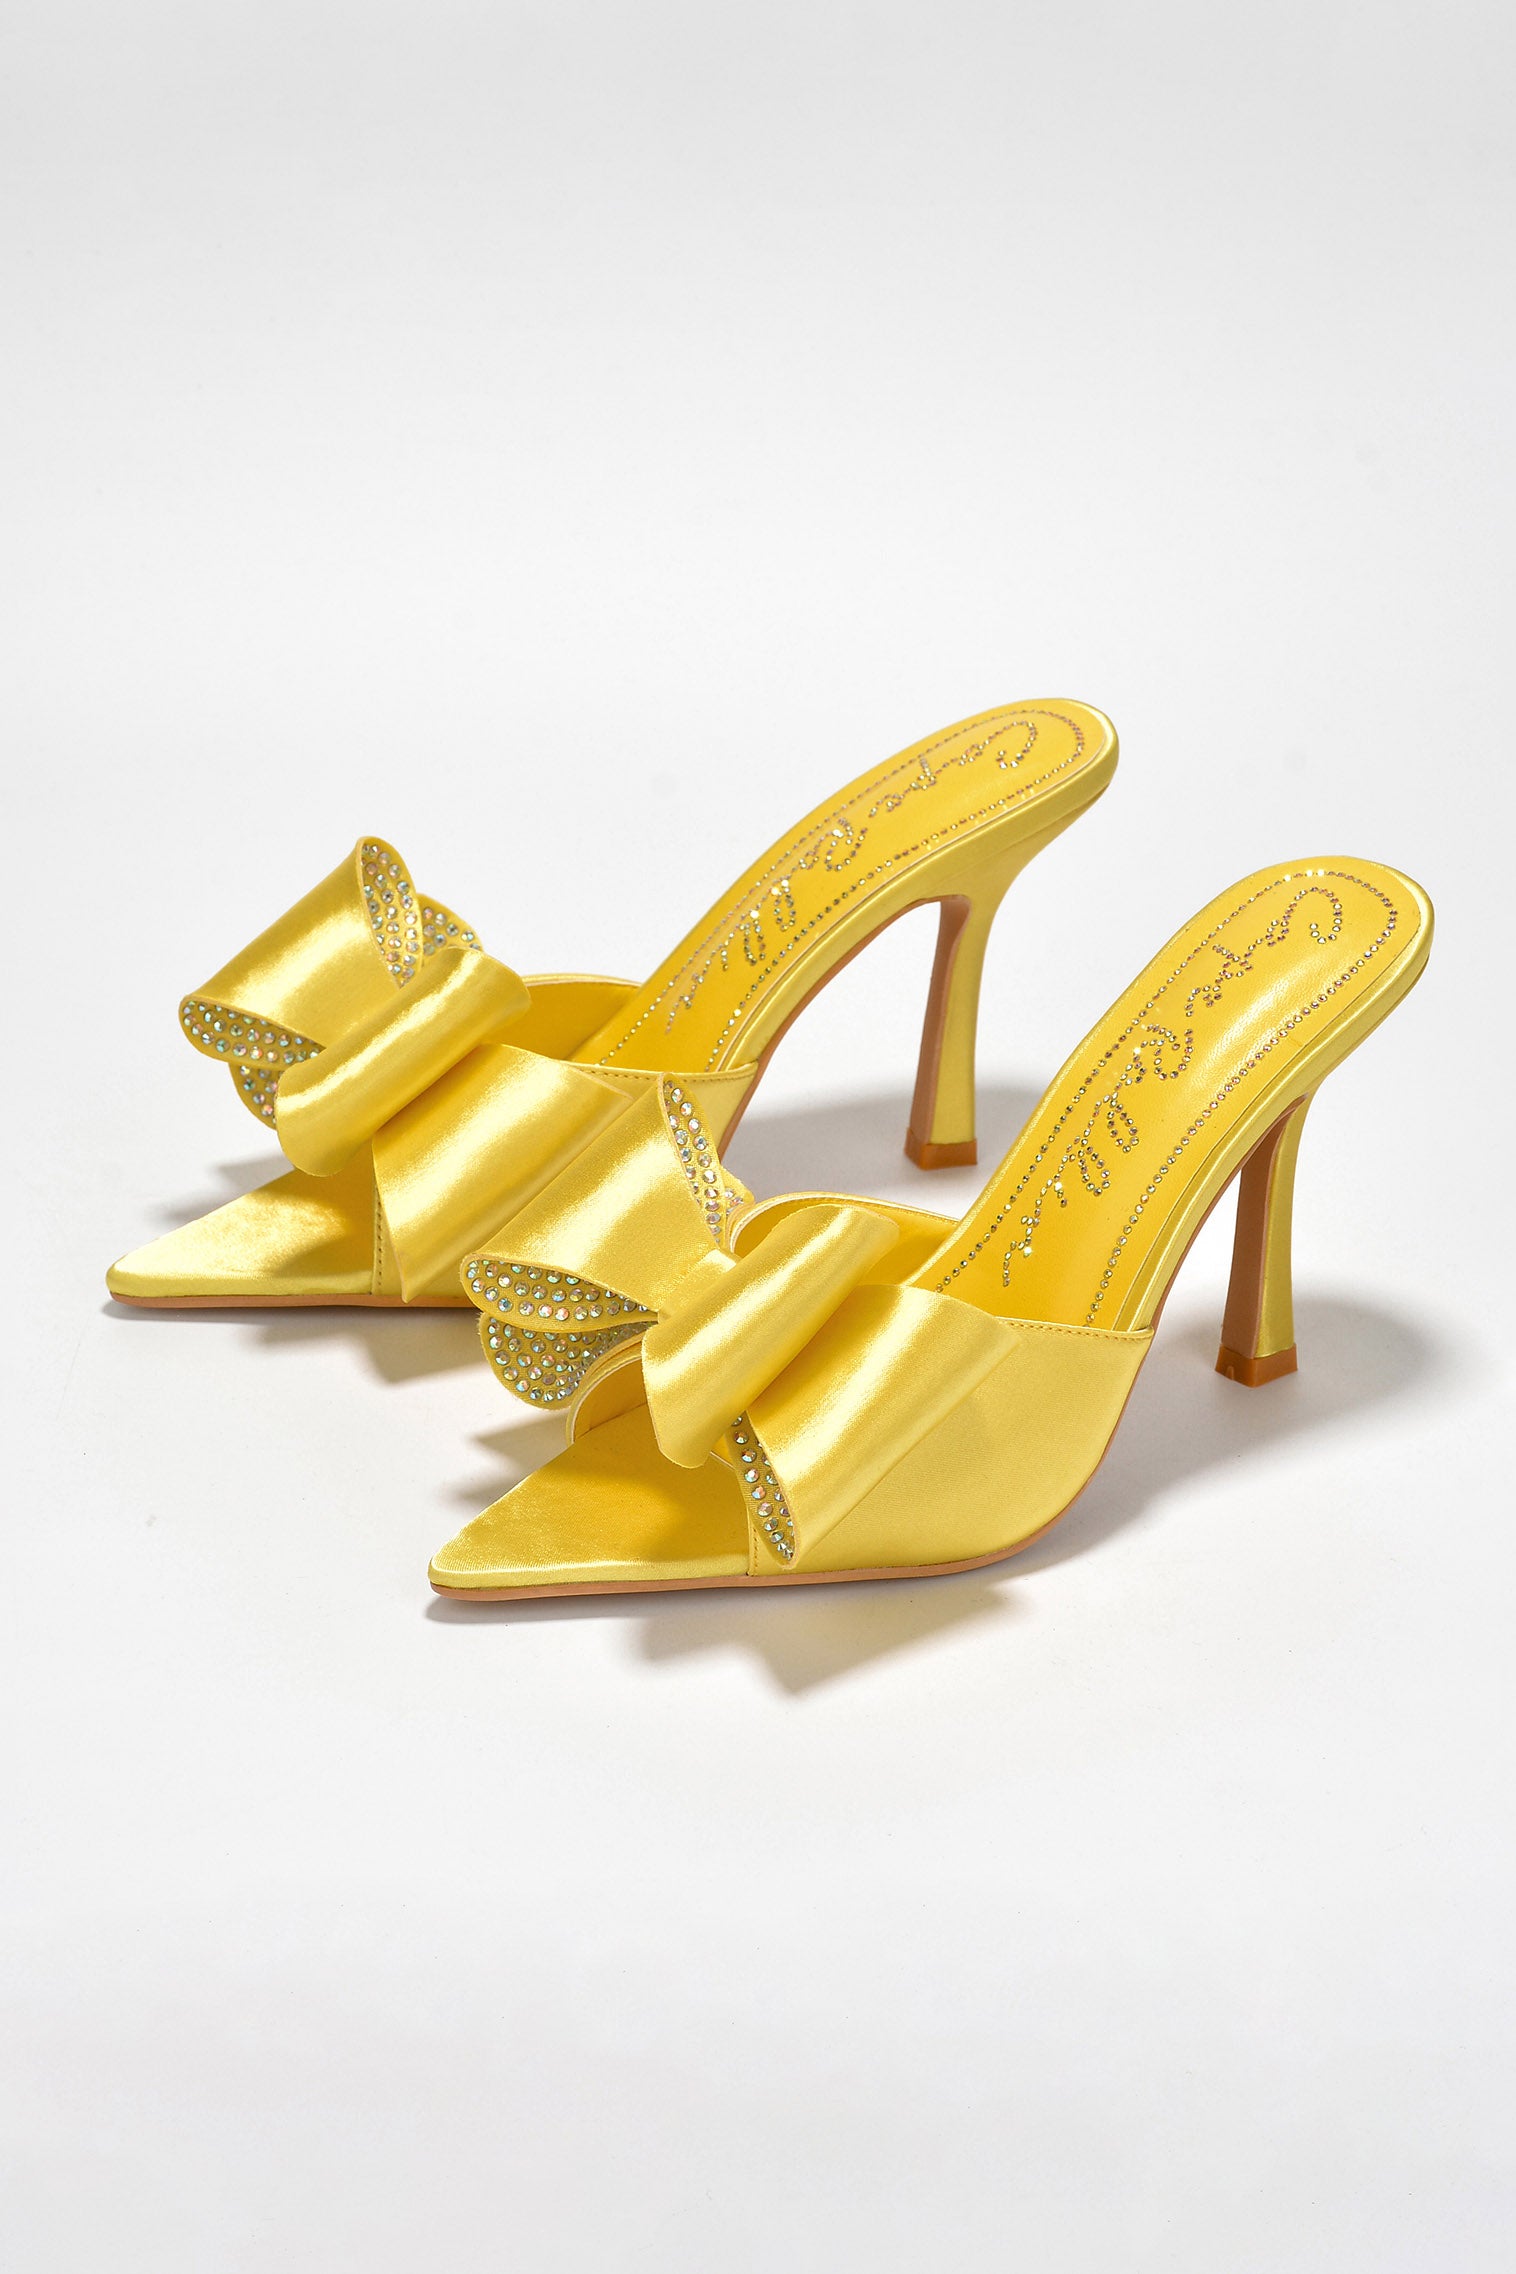 Yellow Bow High Heel Stilettos | Jeweled shoes, Fashion shoes, Heels